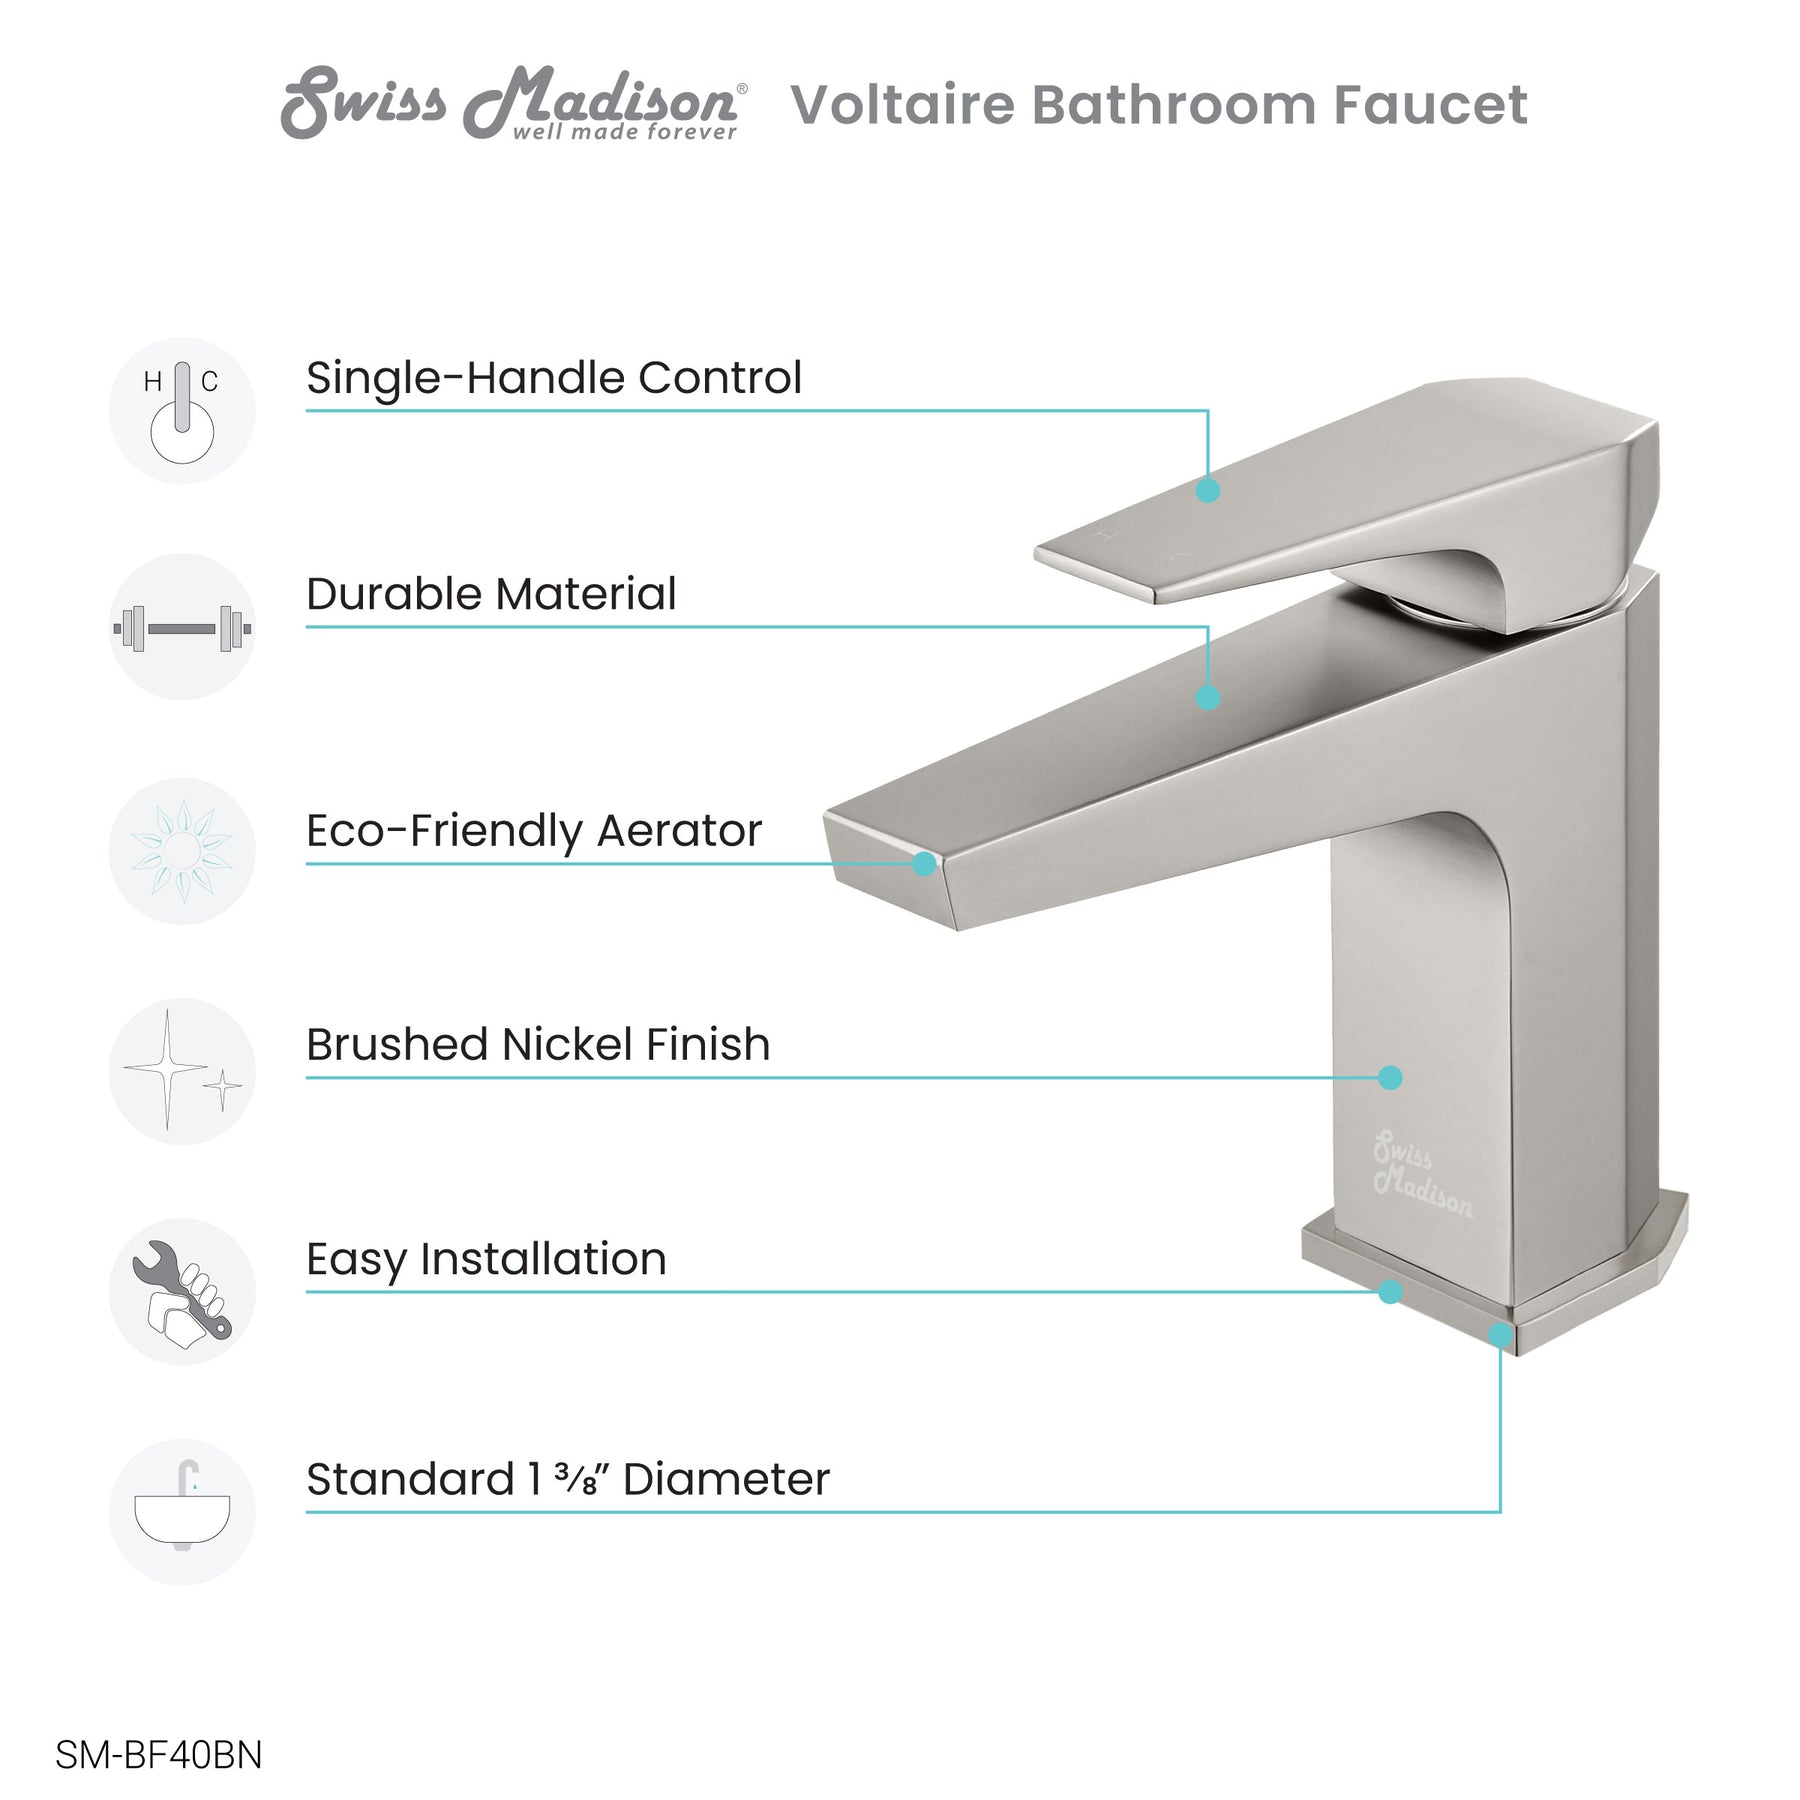 Swiss Madison Voltaire Single Hole, Single-Handle, Bathroom Faucet - SM-BF40